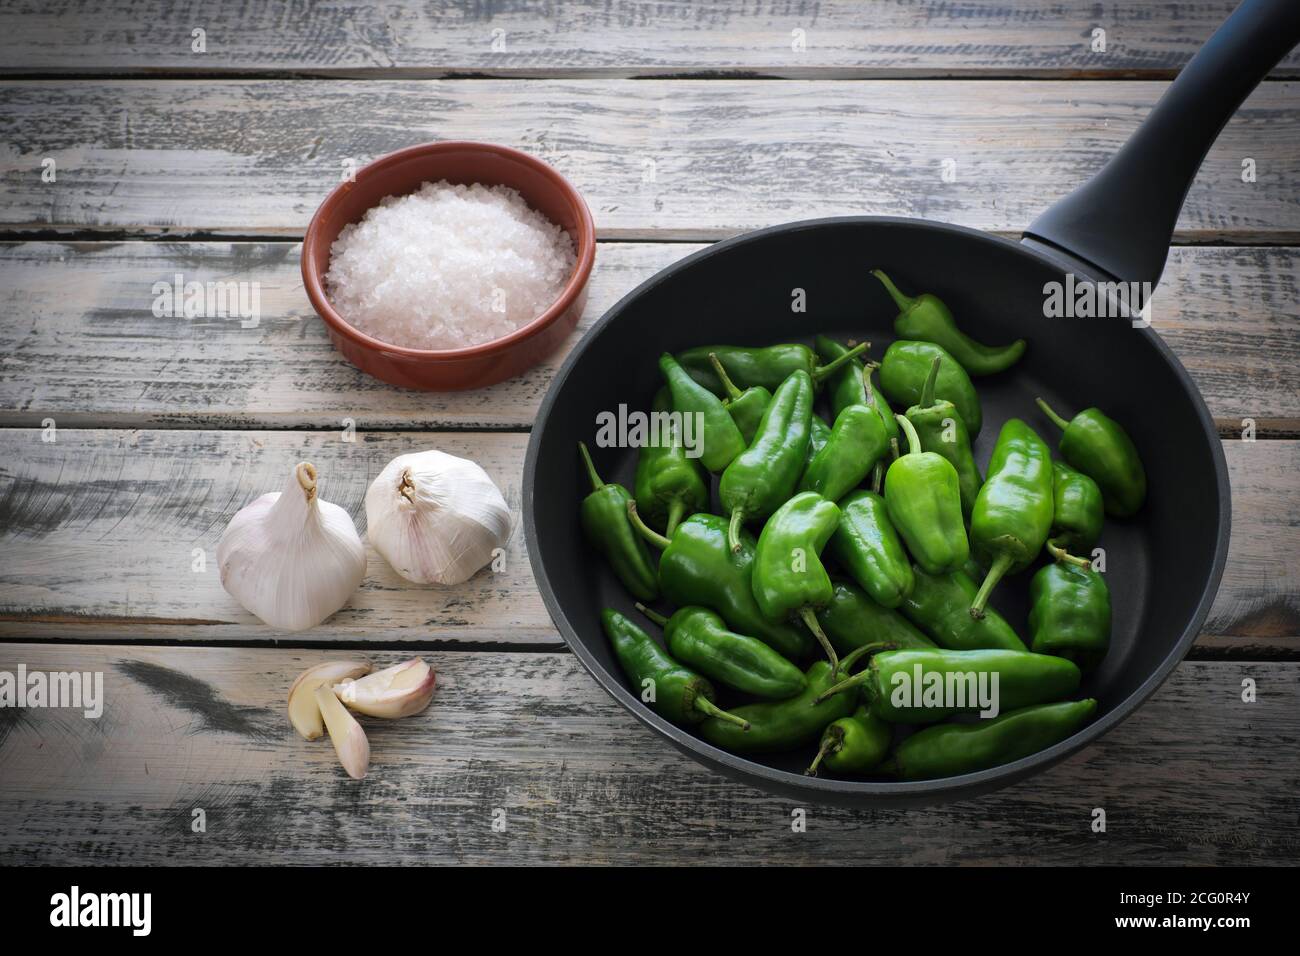 A black pan filled with raw pimentos, nicely arranged on a white shabby chic wooden plate, next to it a bowl of coarse sea salt and garlic Stock Photo